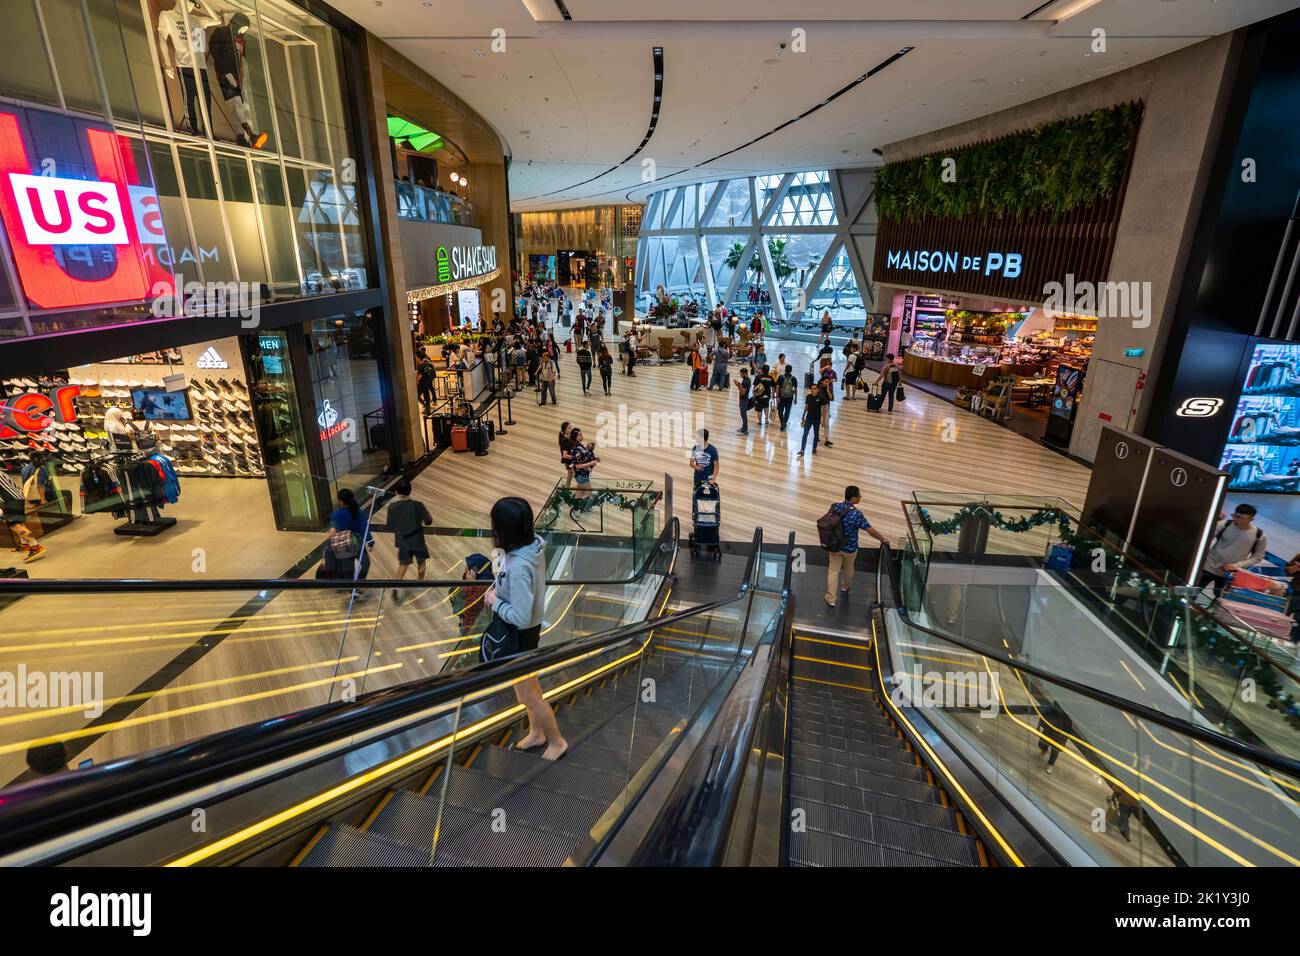 People on escalator in Changi Airport Shopping Mall, Singapore Stock Photo